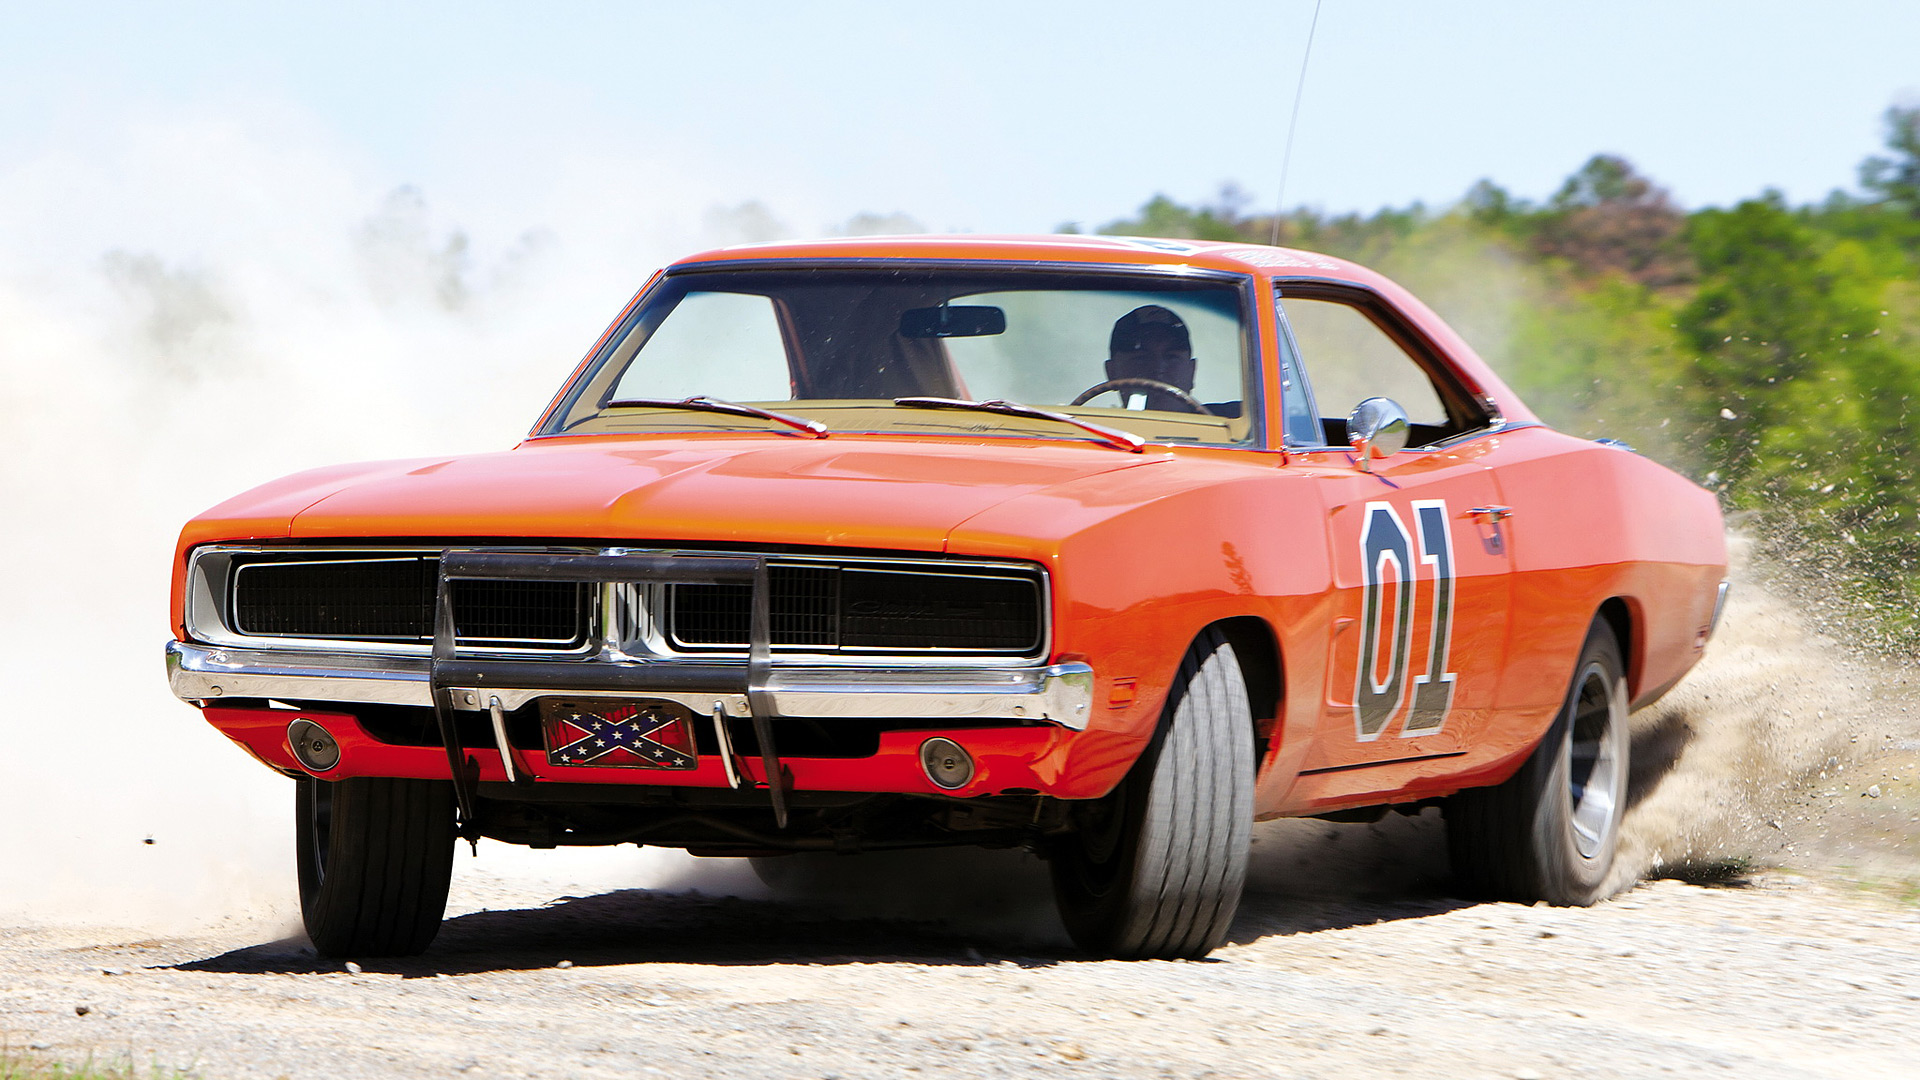 1969 Dodge Charger General Lee Picture - Dodge Charger Generale Lee , HD Wallpaper & Backgrounds